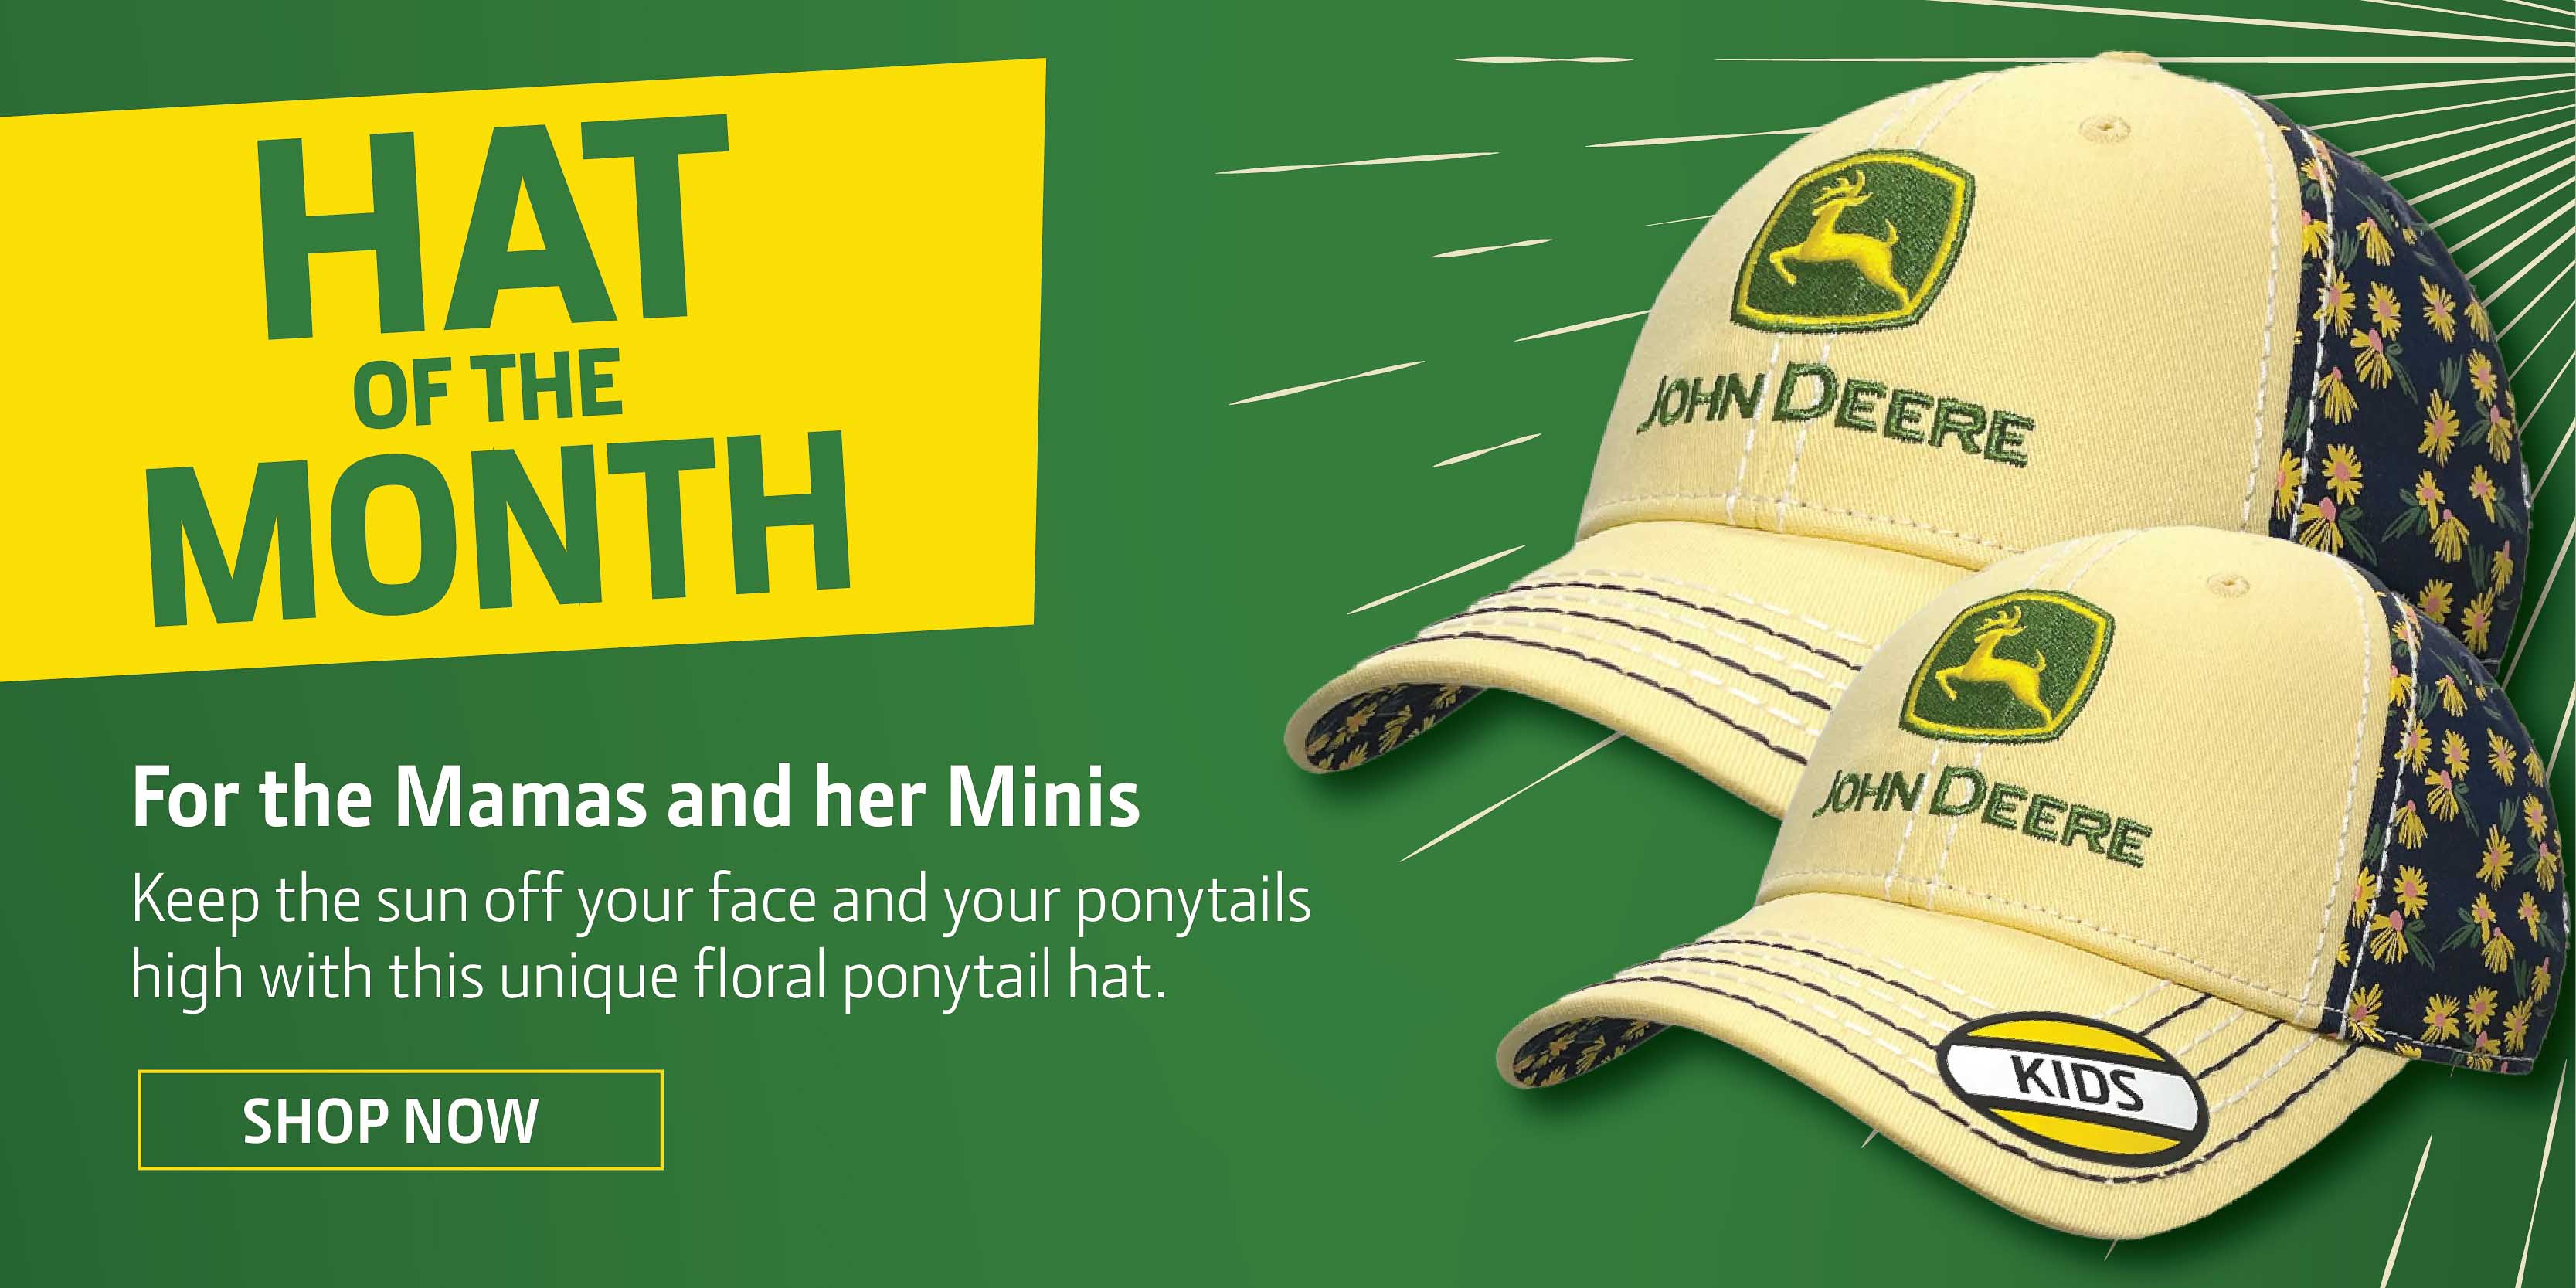 John Deere Hat of the Month. Gifts for Mom.For the Mamas and her Minis  Keep the sun off your face and your ponytails high with this unique floral ponytail hat.